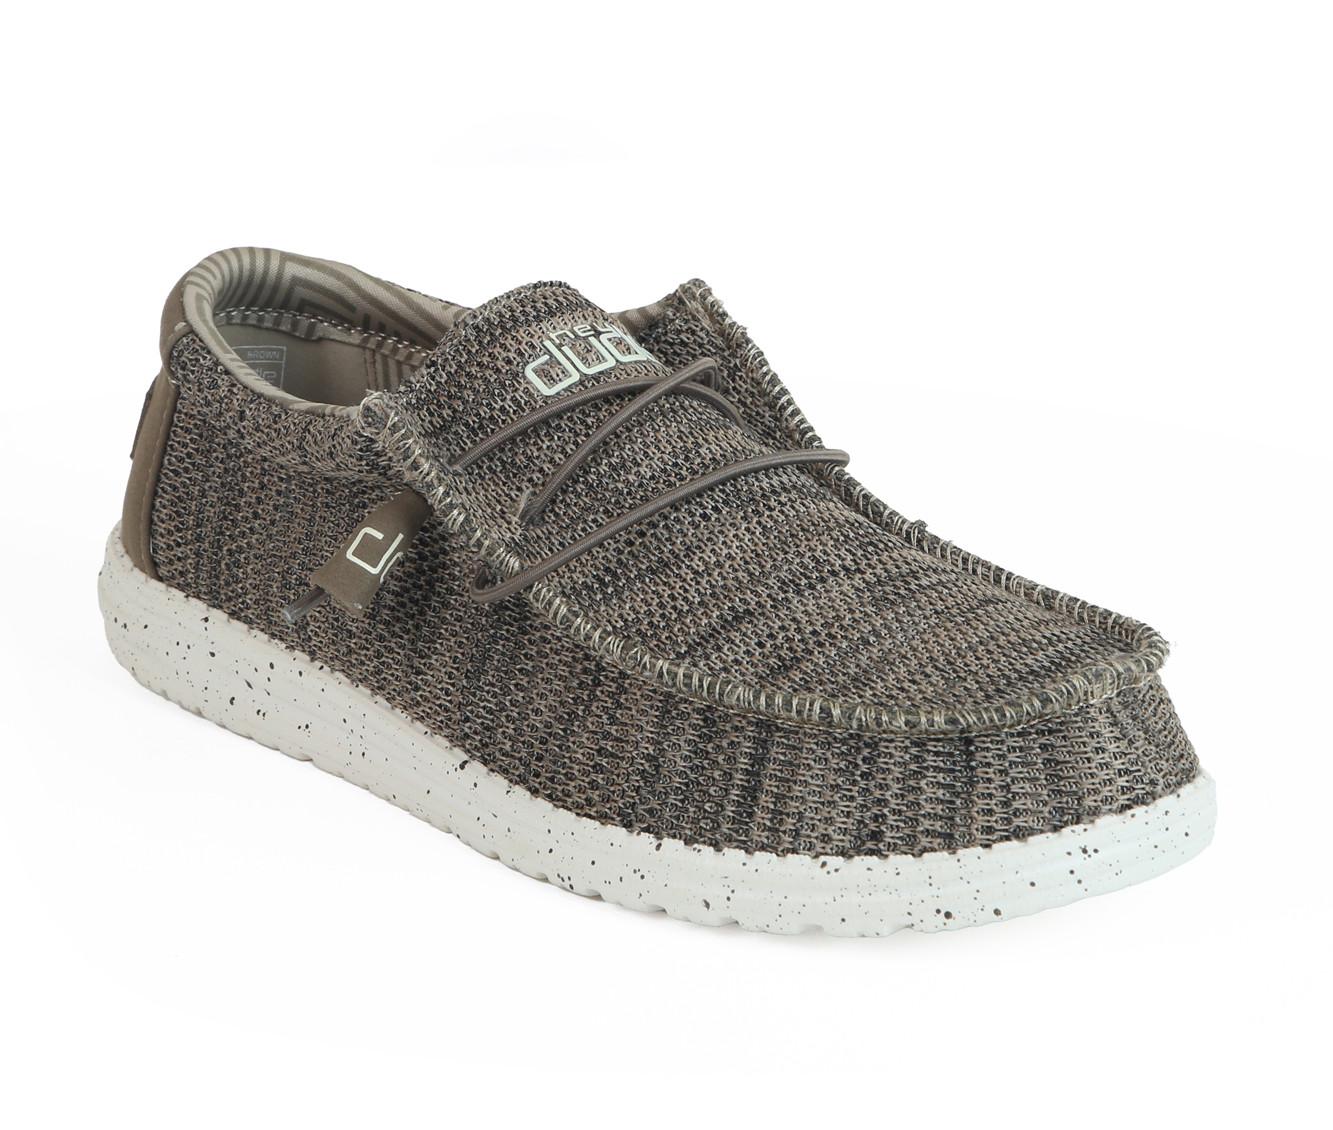 Hey Dude Wally Sox Tri Fans, Mens Casual Shoes